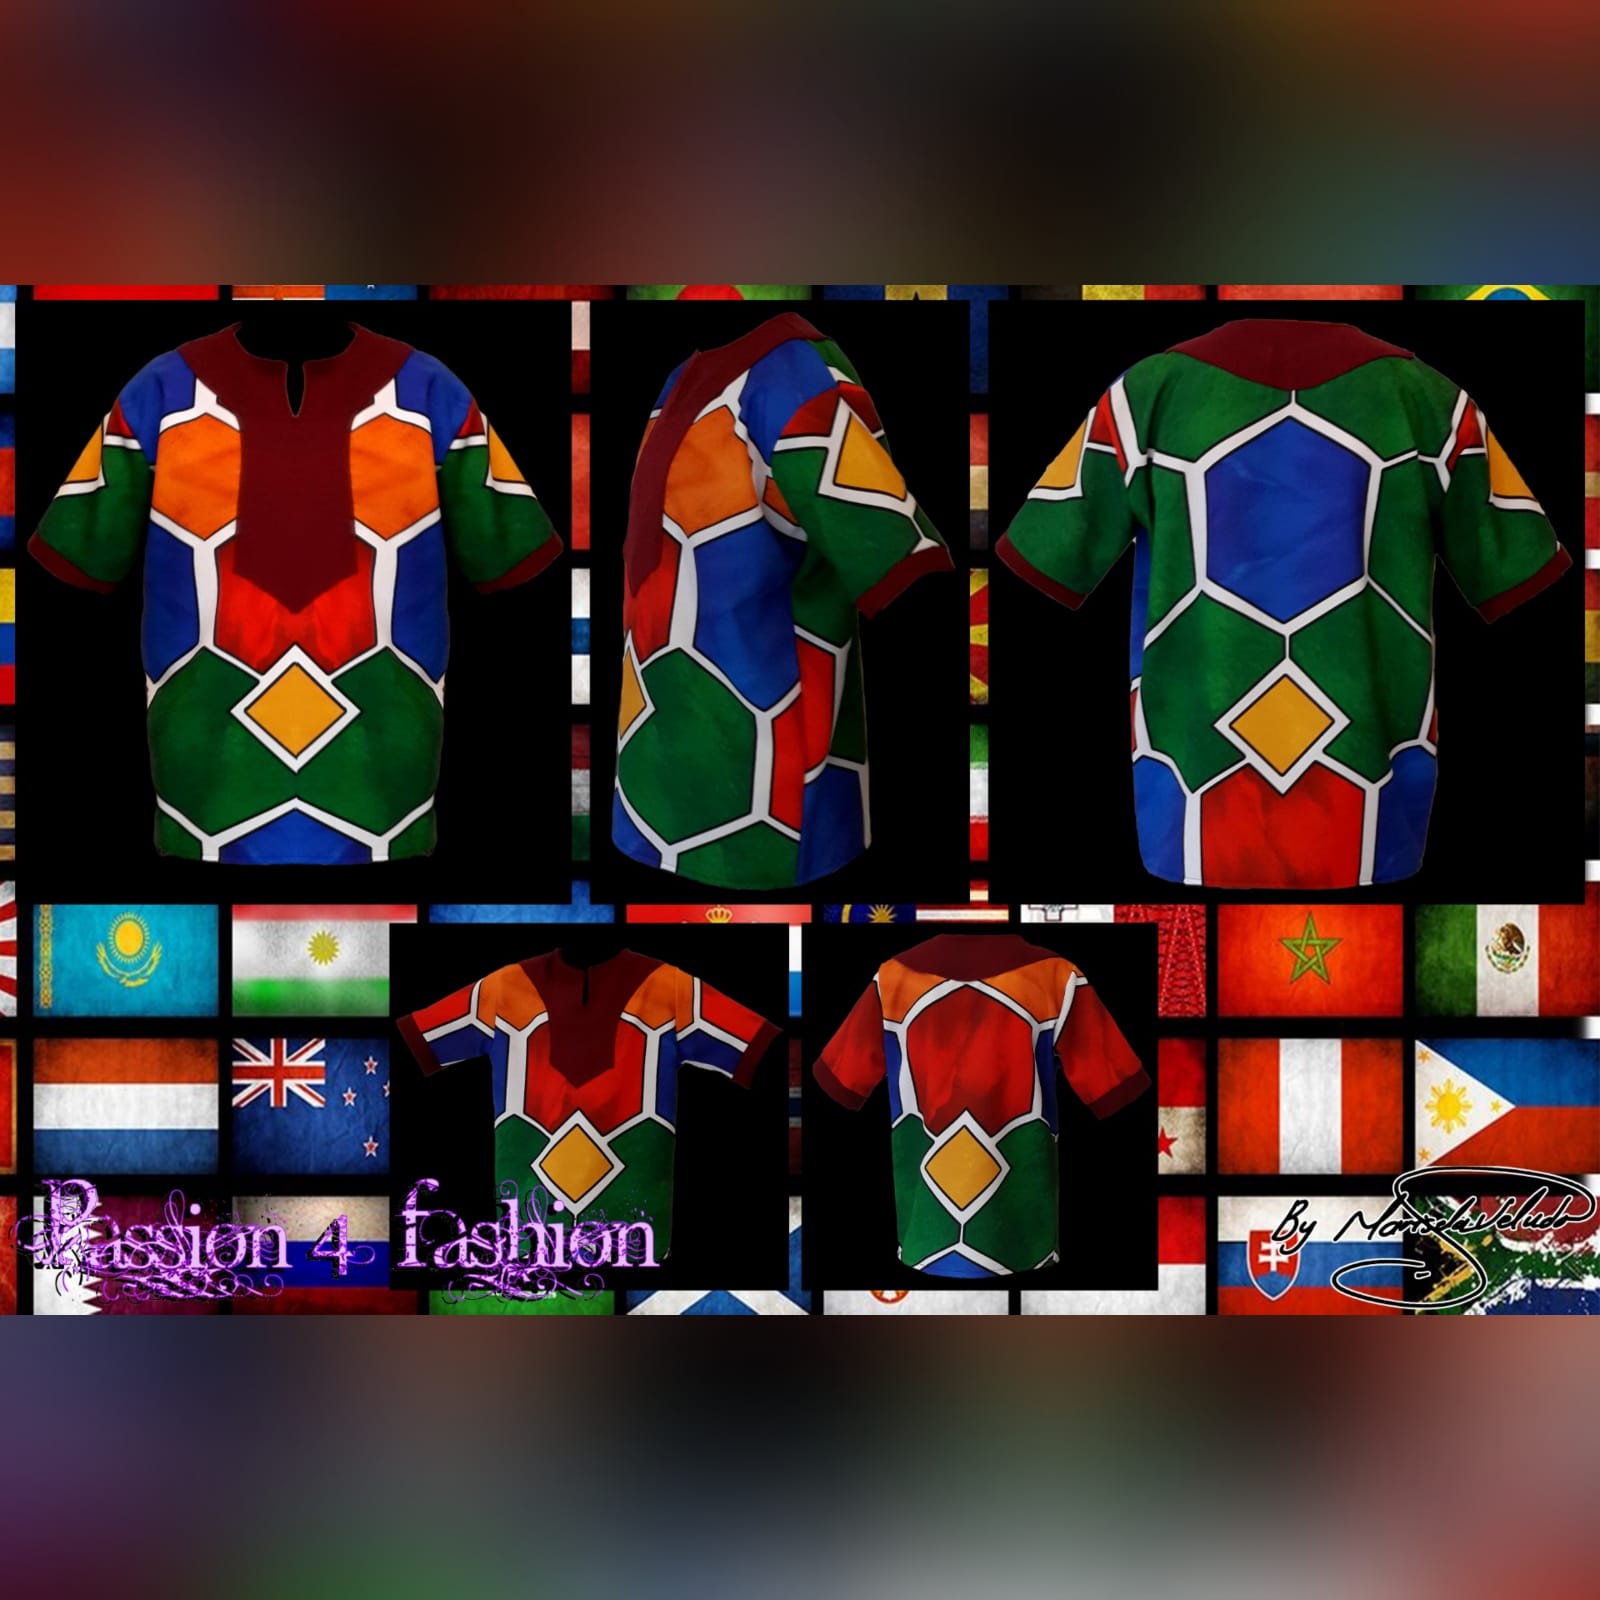 Matching father and son ndebele shirts 3 matching father & son ndebele shirts. Kids shirt sold separately. Please contact us to place an order.